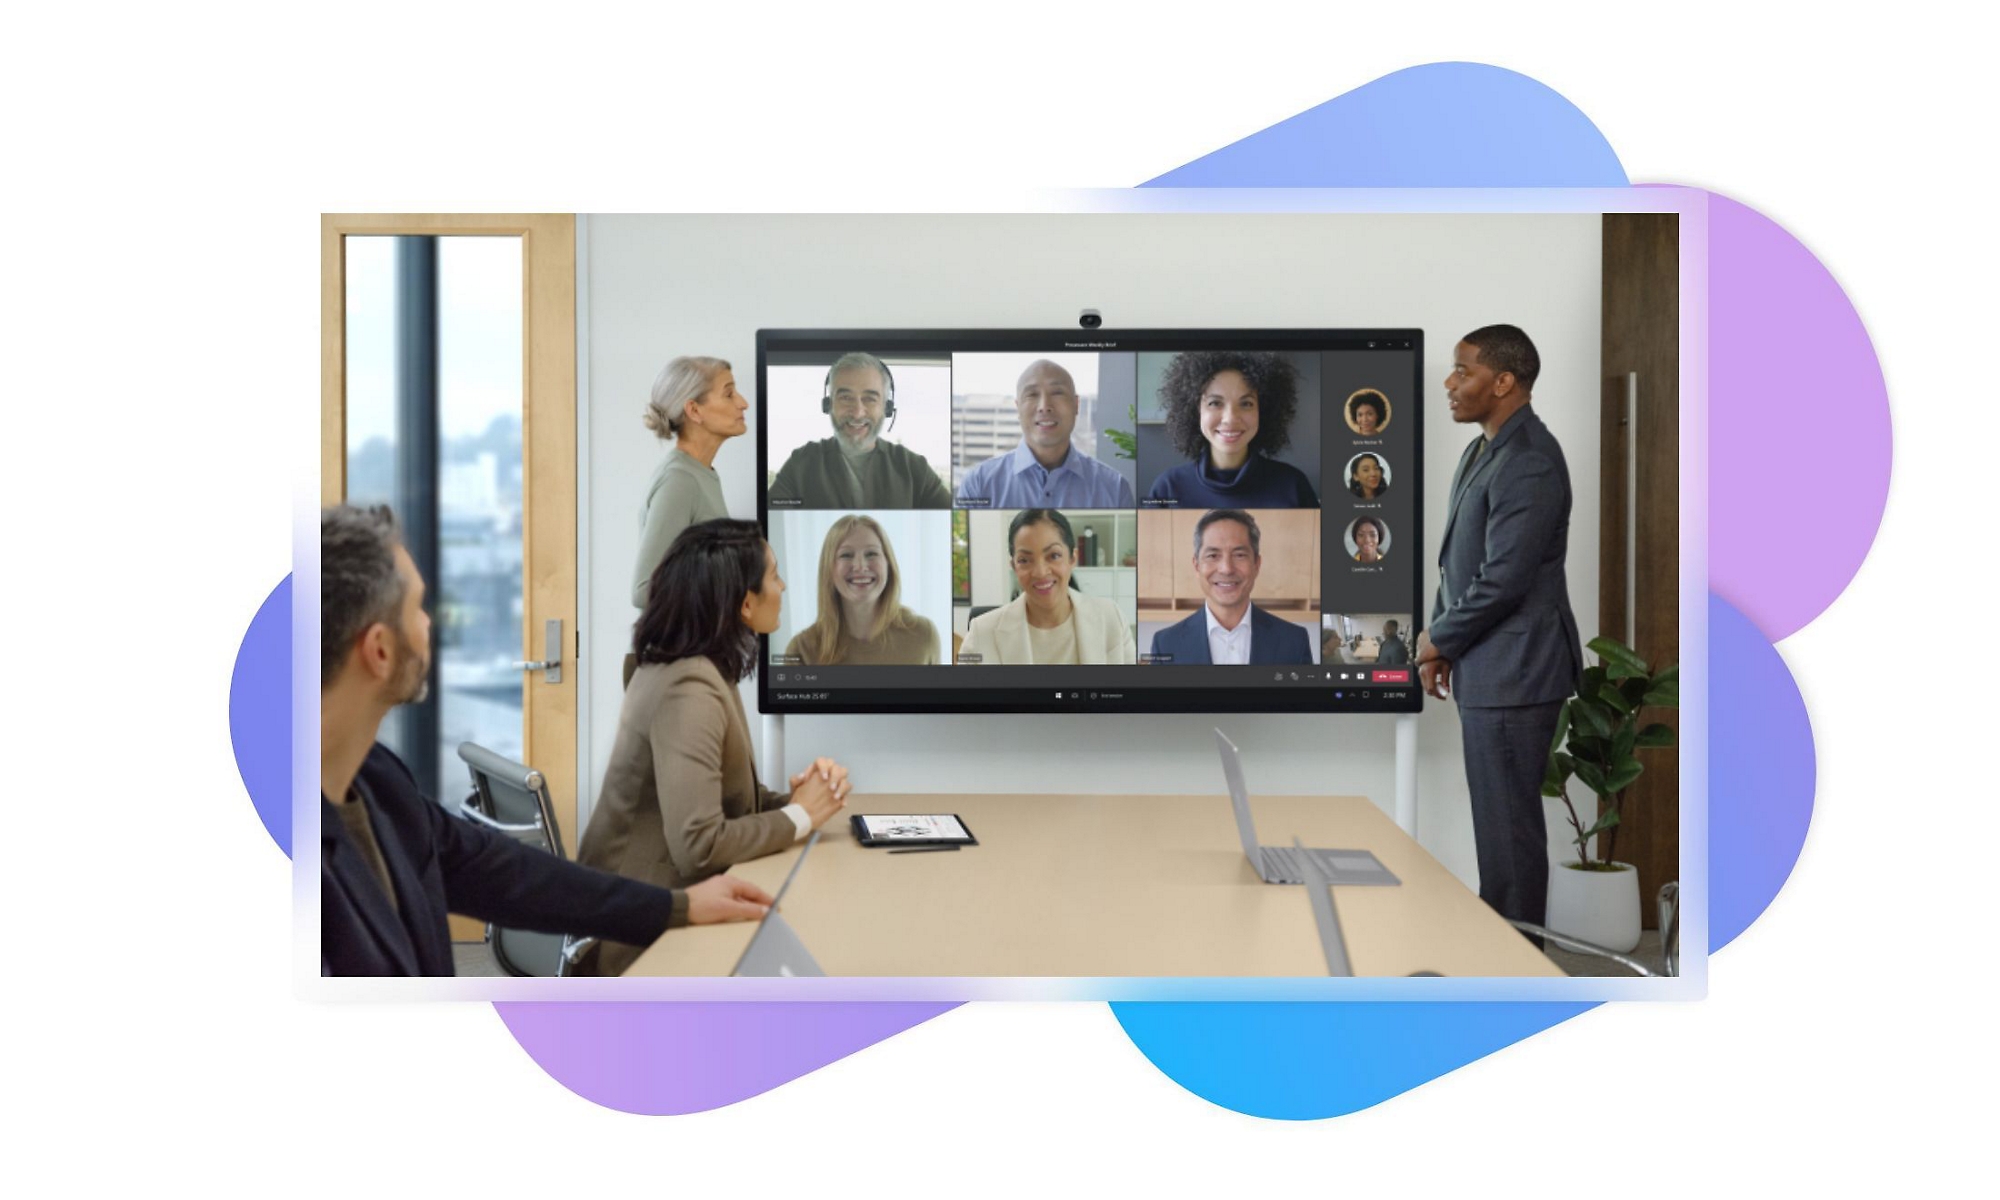 A group of people in a meeting room participating in a Teams call via the television mounted on the wall behind them.